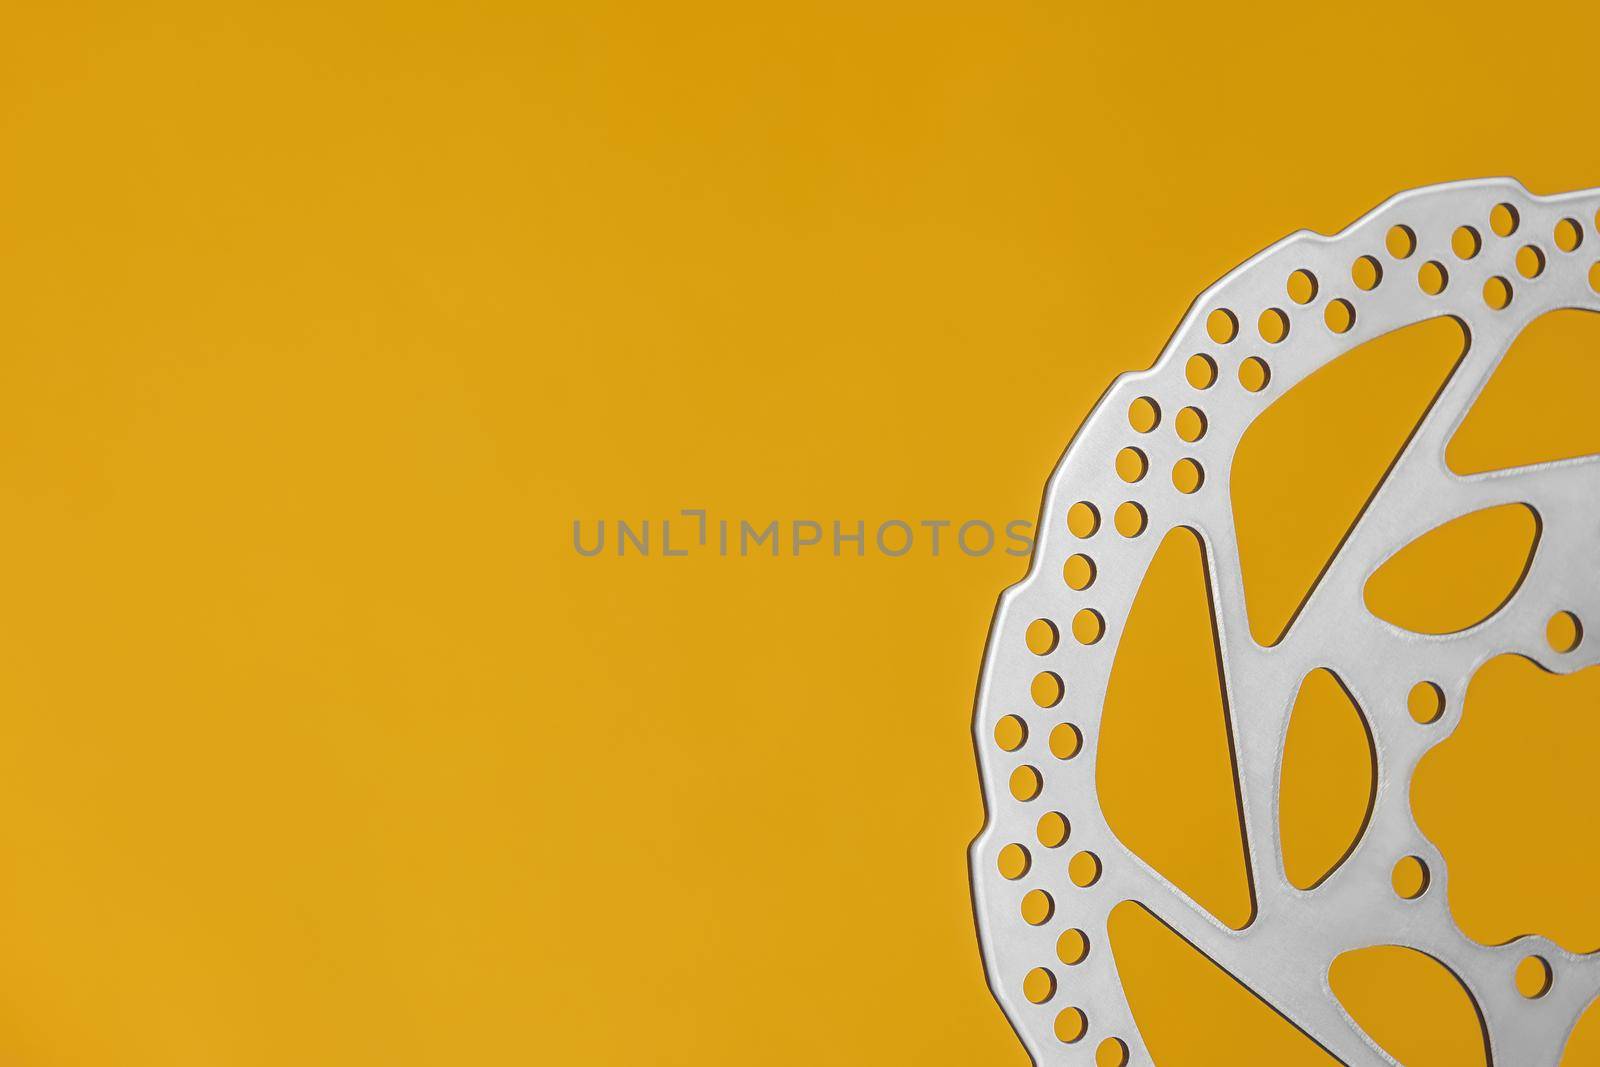 New brake disc for bicycle hydraulic brakes with yellow background and copy space by apavlin